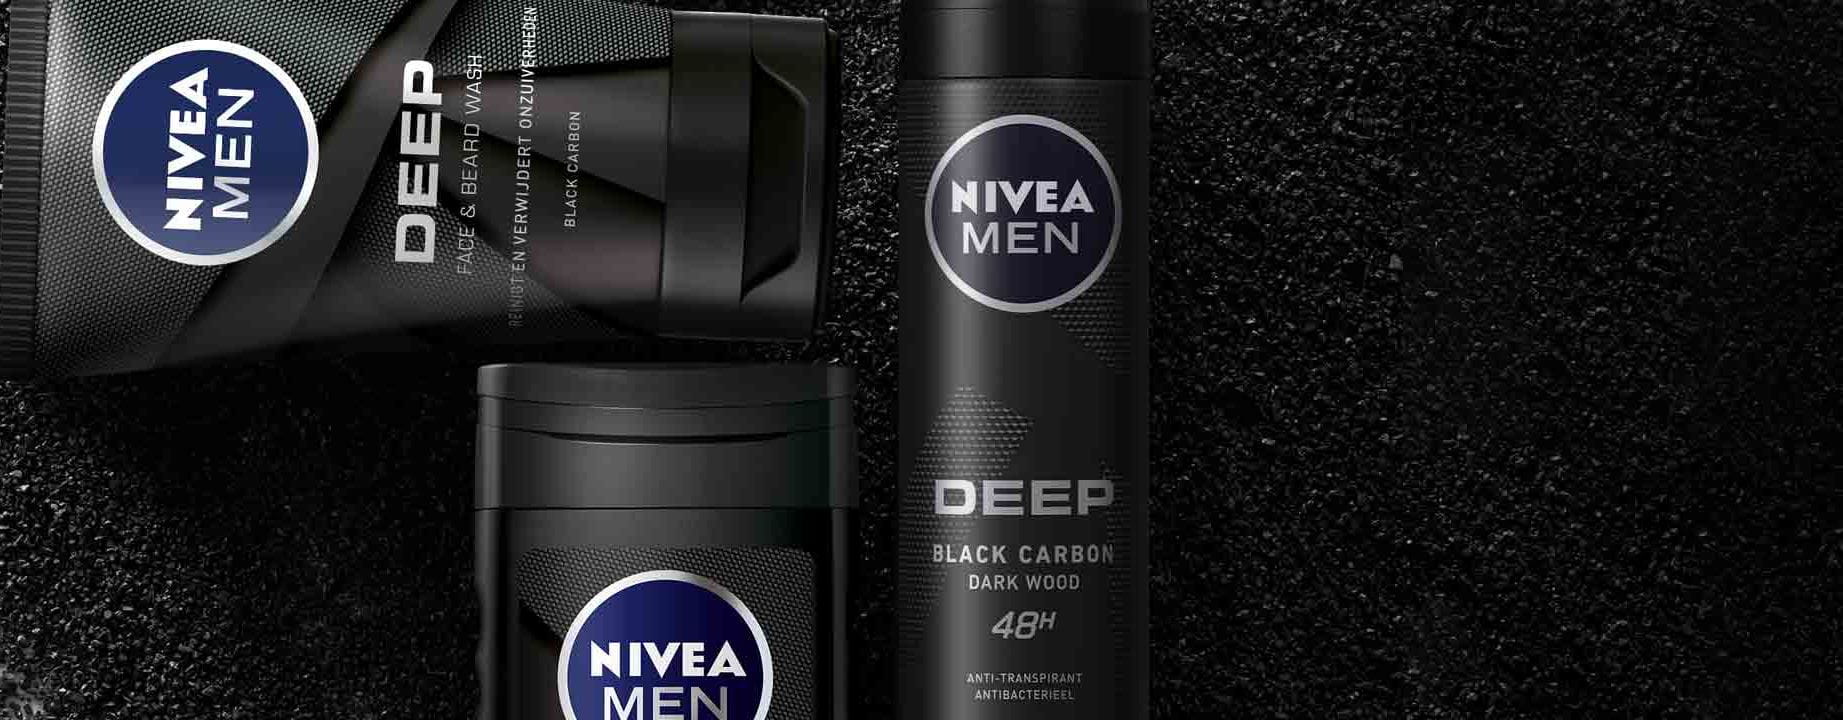 abces Armstrong staal NIVEA MEN: alles voor mannen| NIVEA